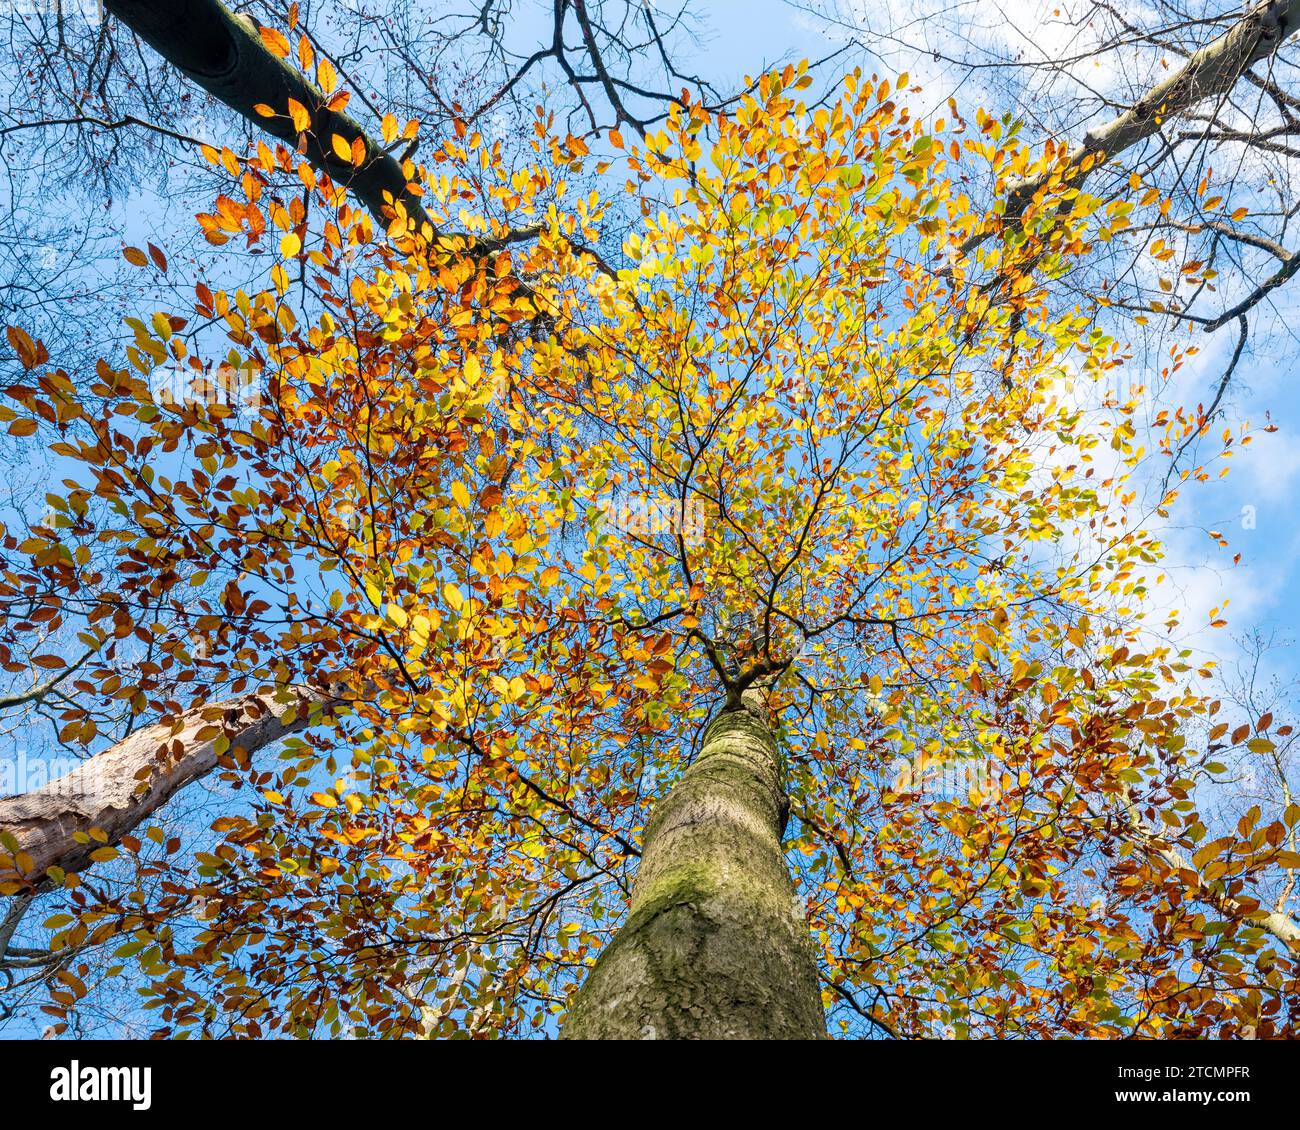 last beech tree in the fall with yellow and orange leaves of autumn against blue sky Stock Photo